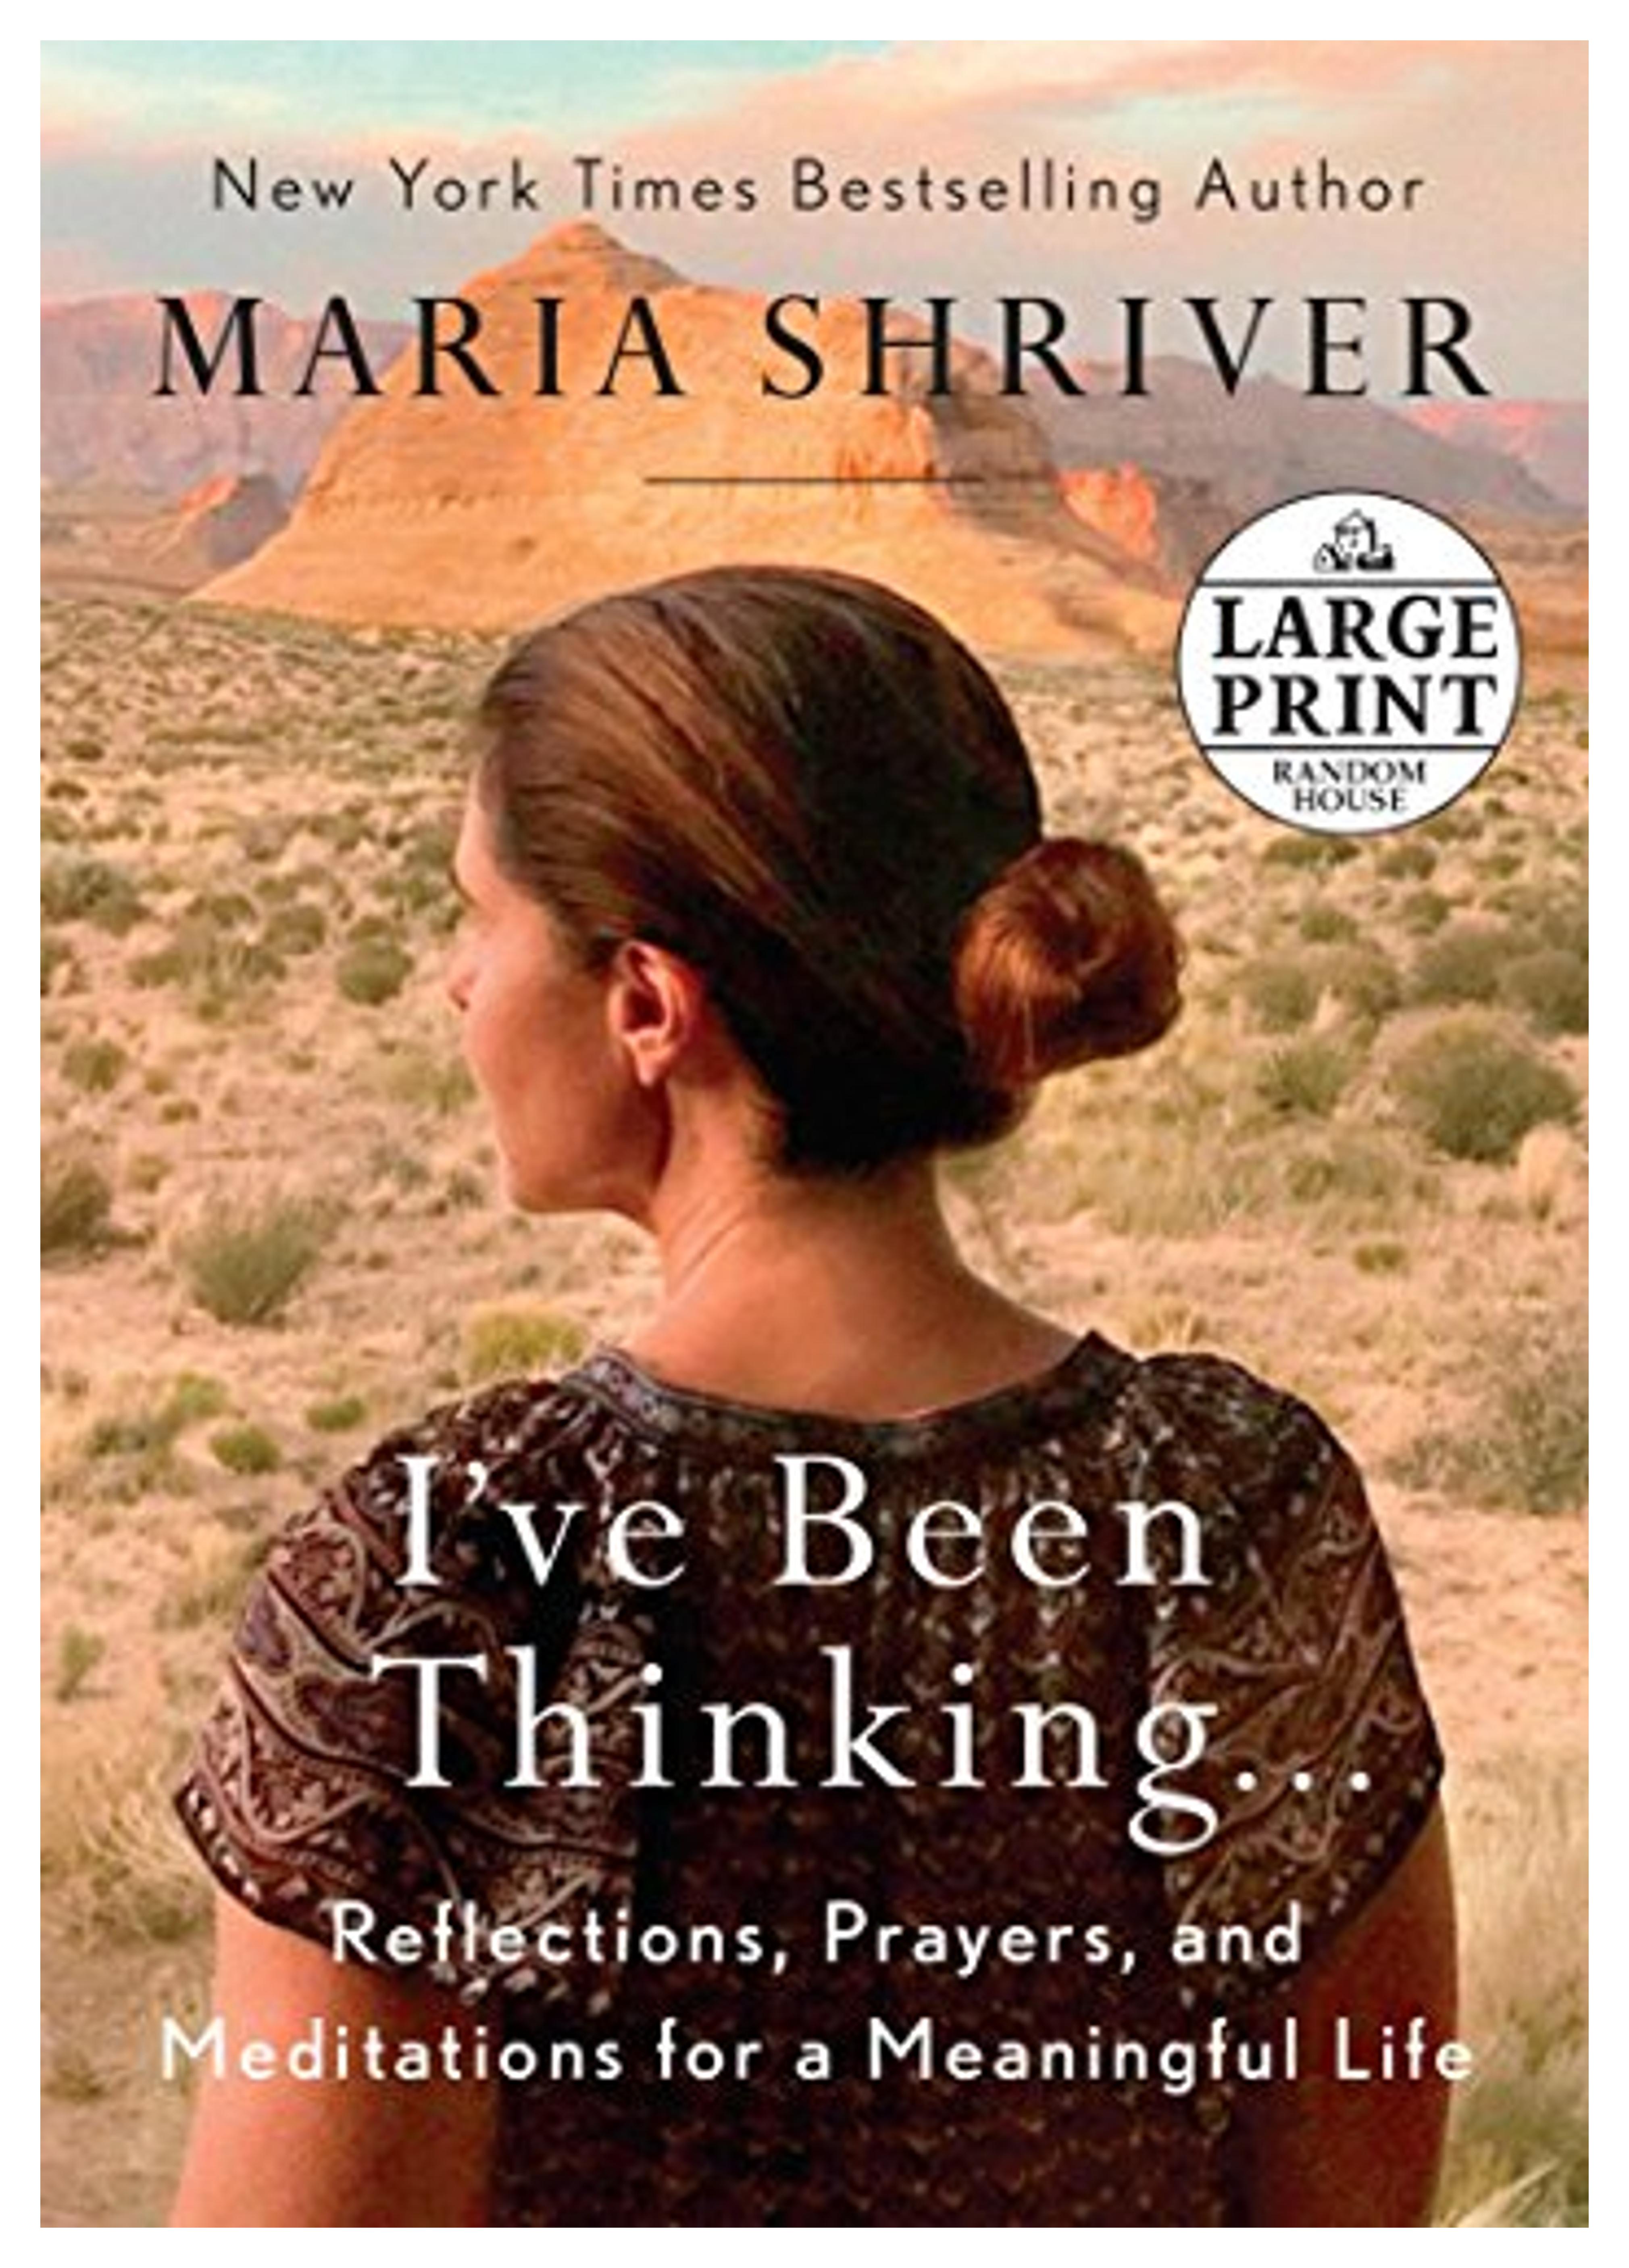 I've Been Thinking . . .: Reflections, Prayers, and Meditations for a Meaningful Life (Random House Large Print): Shriver, Maria: 9780525589396: Amazon.com: Books